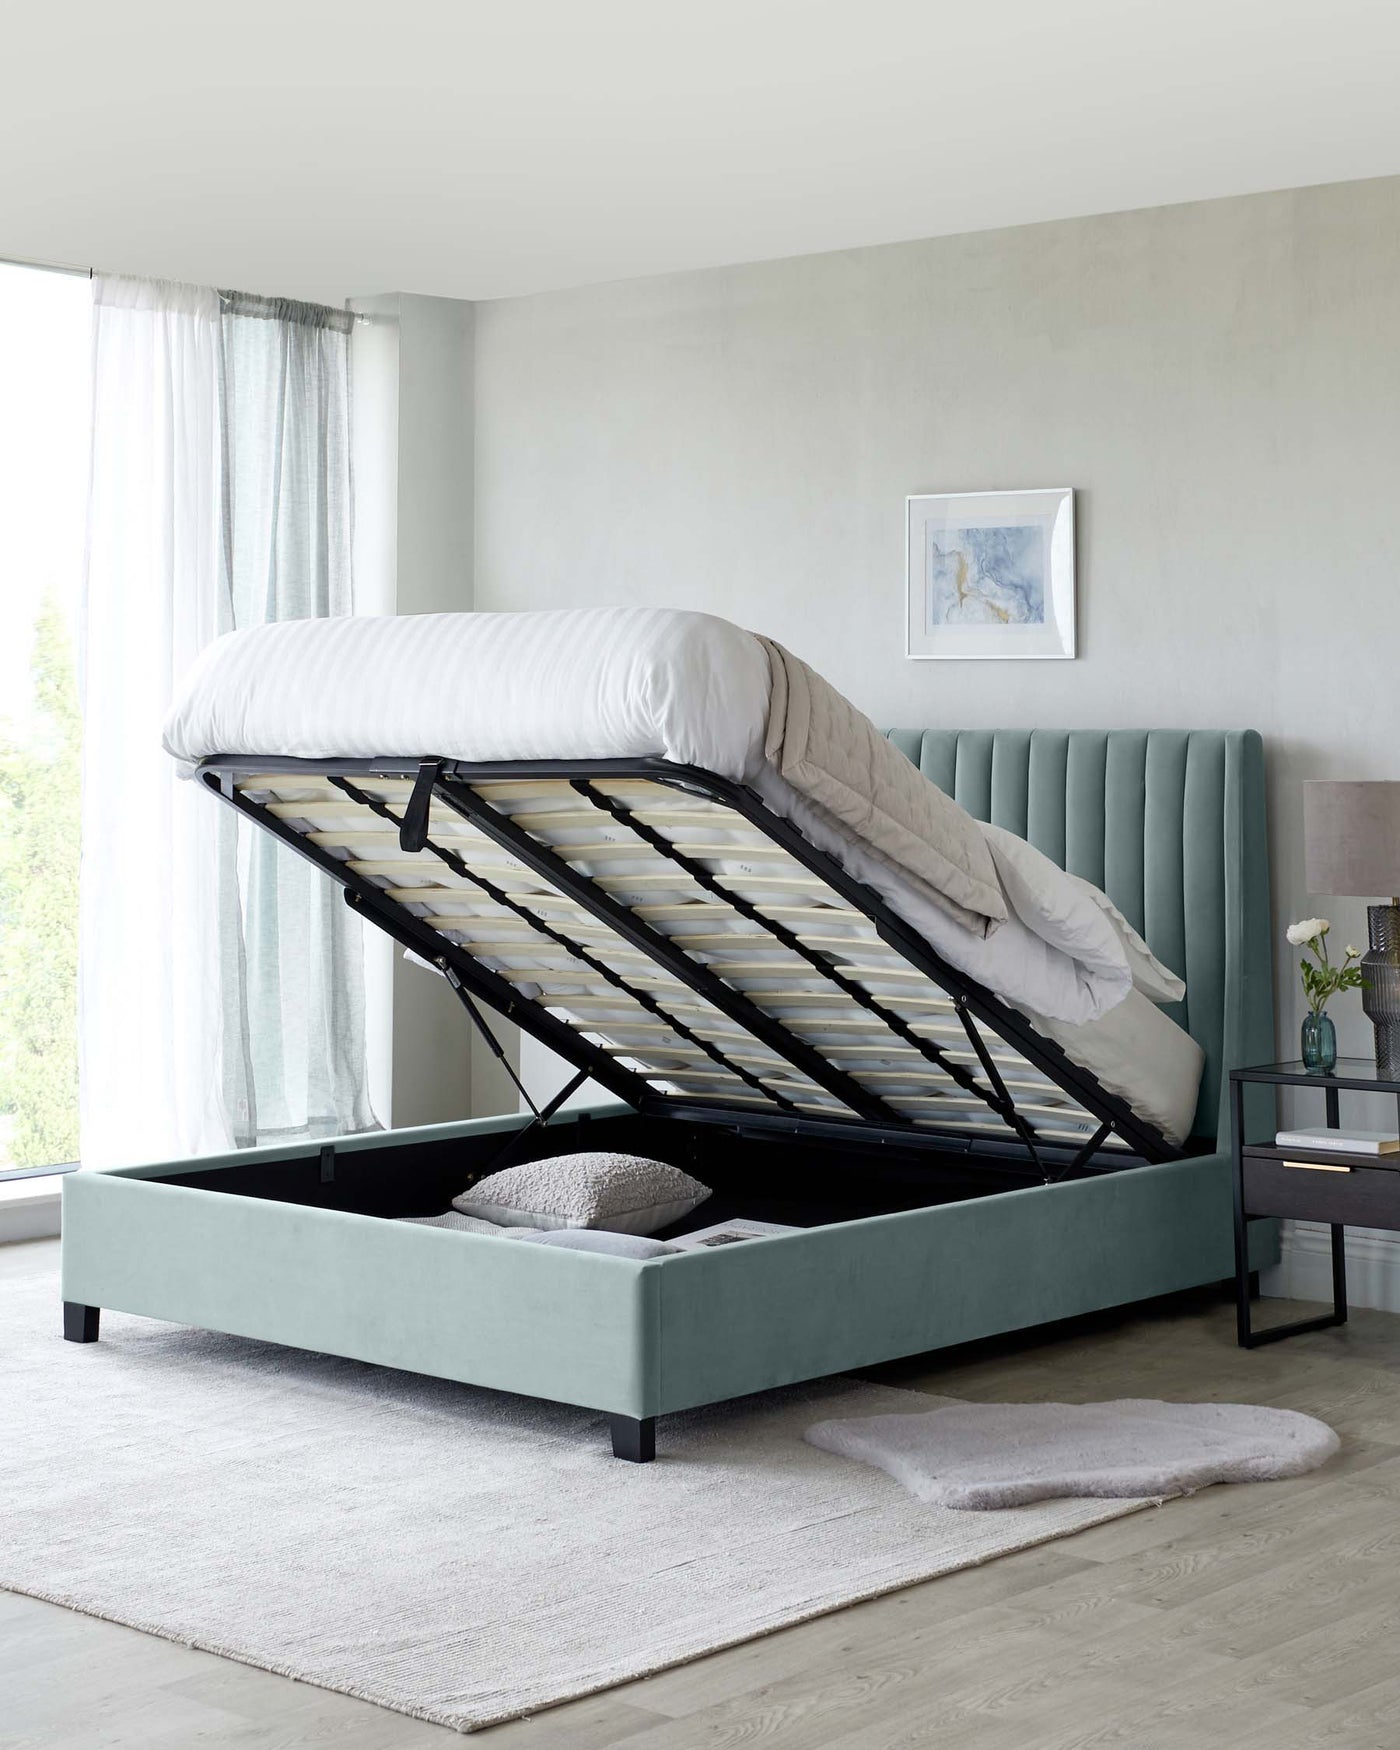 A contemporary-style upholstered storage bed with a teal fabric frame raised to reveal an ample storage compartment underneath. The bed's mattress is propped up on a black metal lifting mechanism, displaying a slatted base. To the right side of the bed is a sleek, modern black metal nightstand with a glass top, an open shelf below, and a white drawer. The room features a neutral colour palette with a subtle painting on the wall and light-filtering curtains.